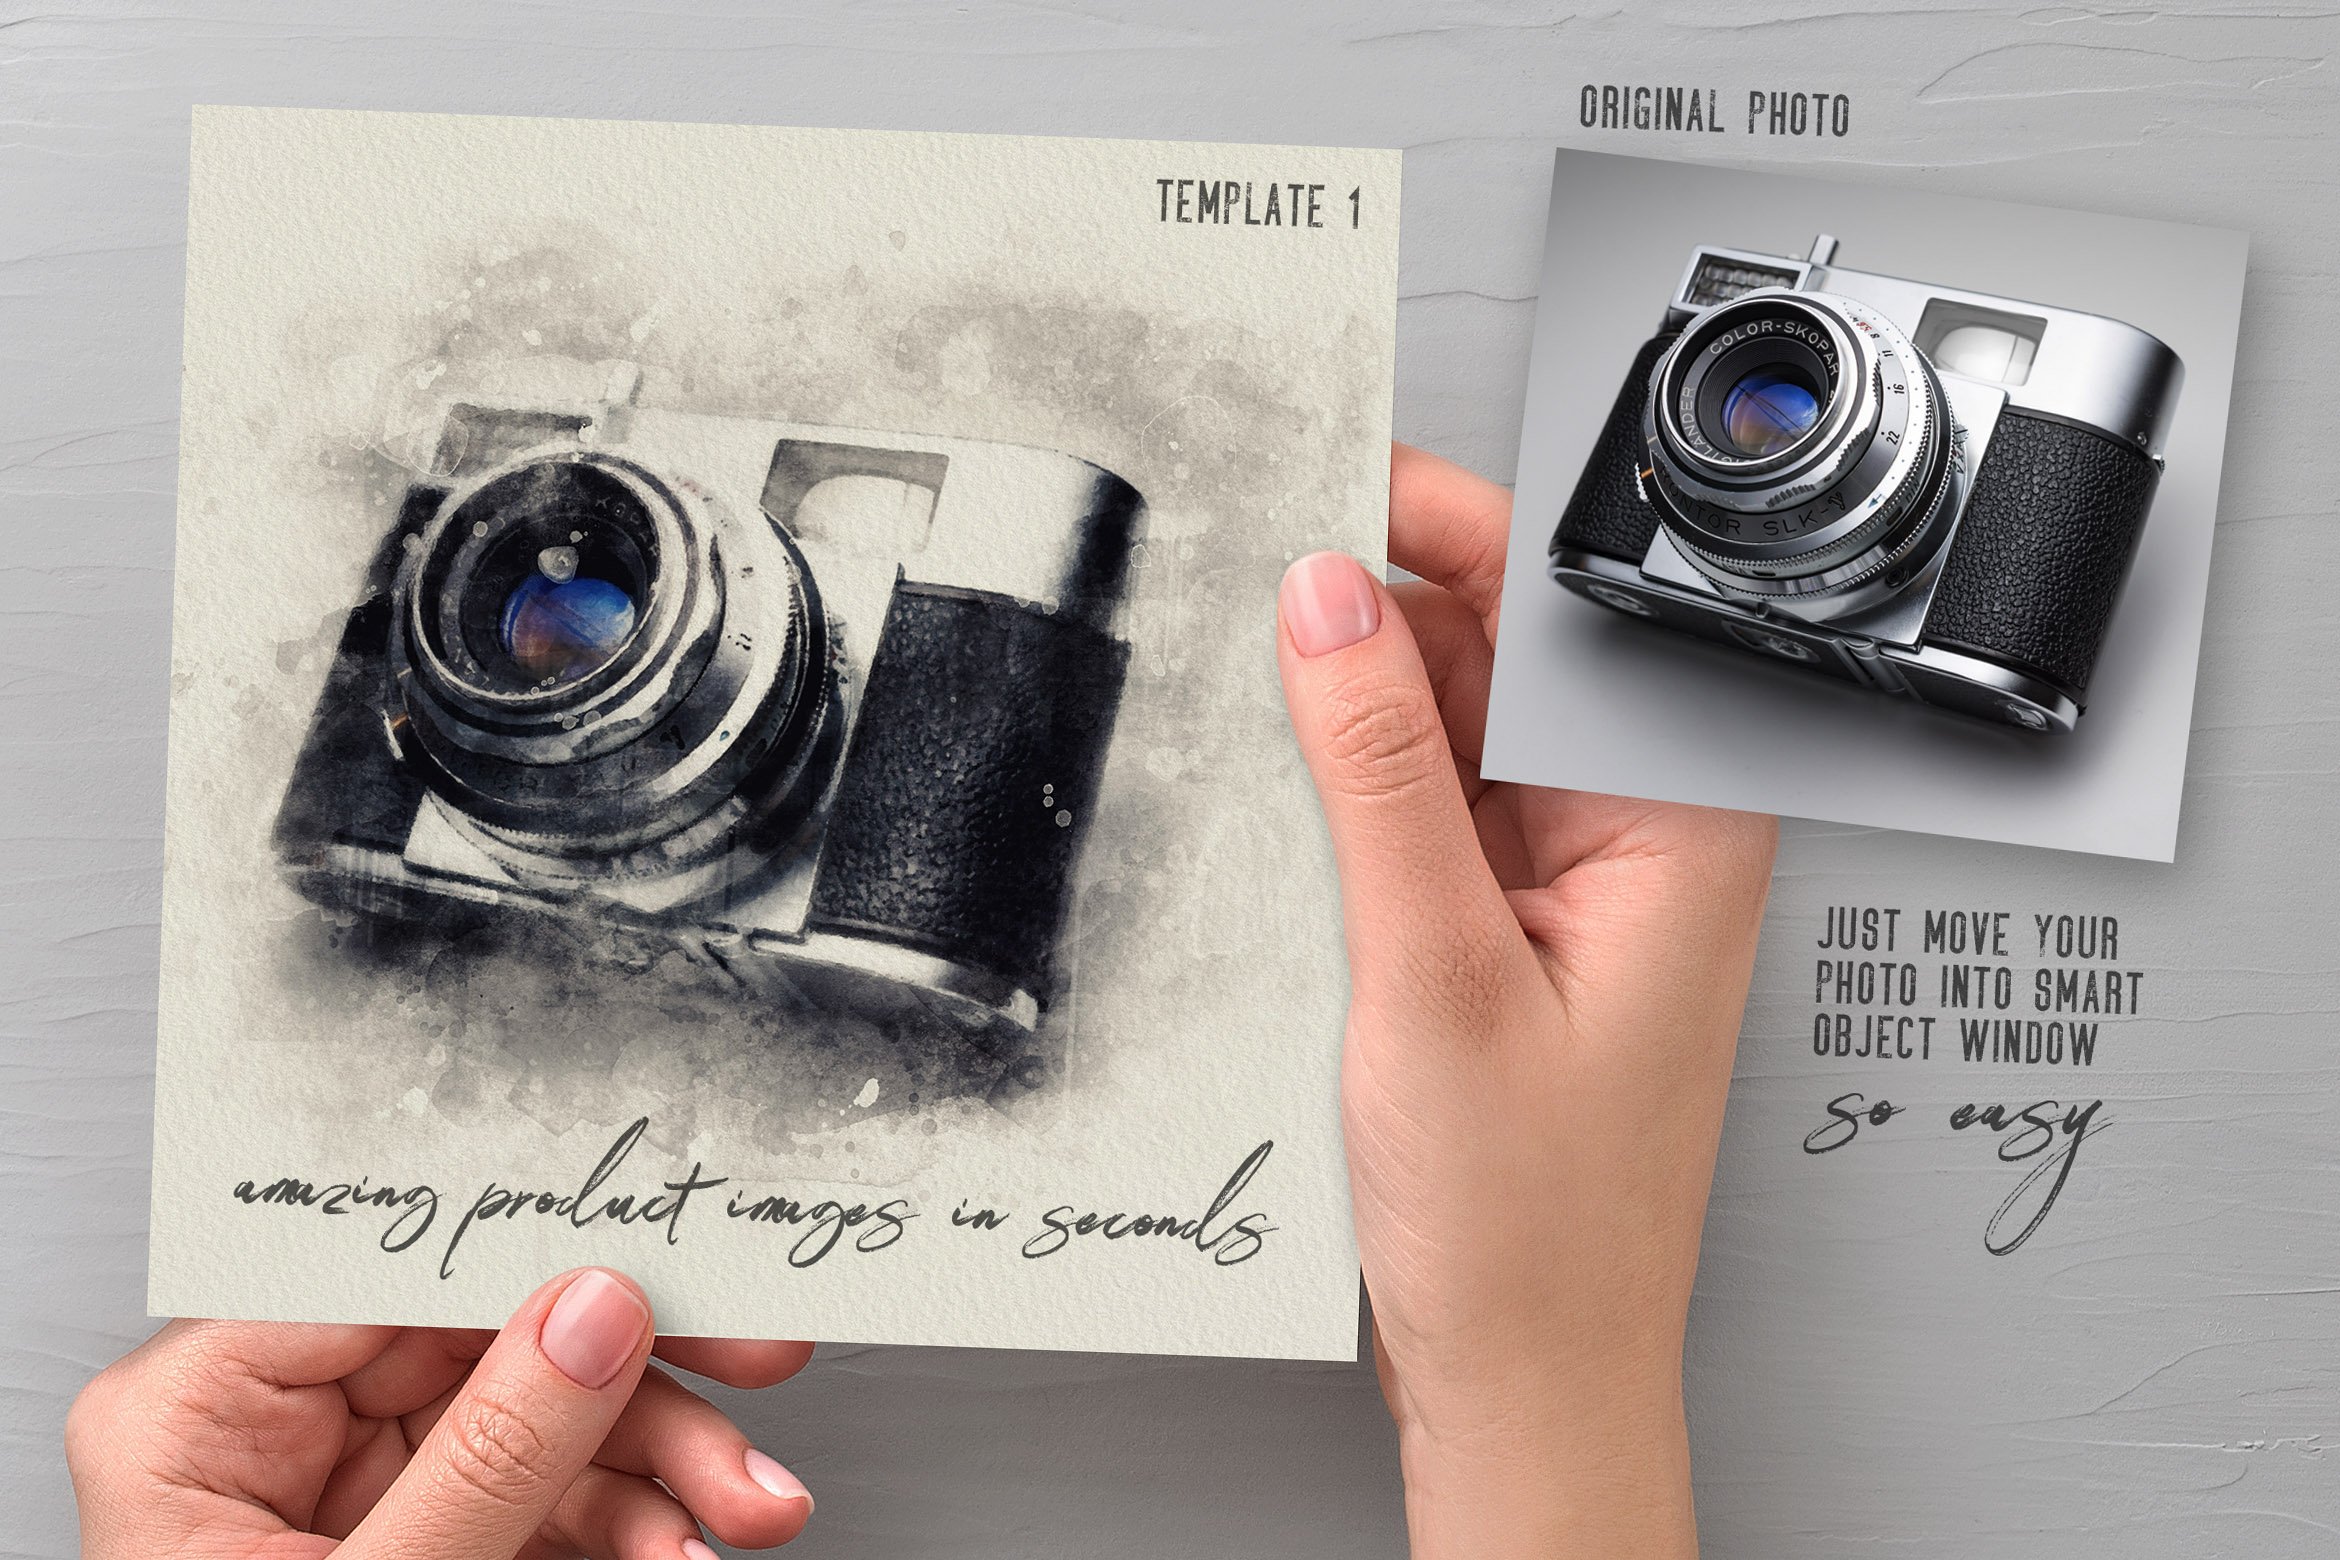 Create amazing product images in seconds.